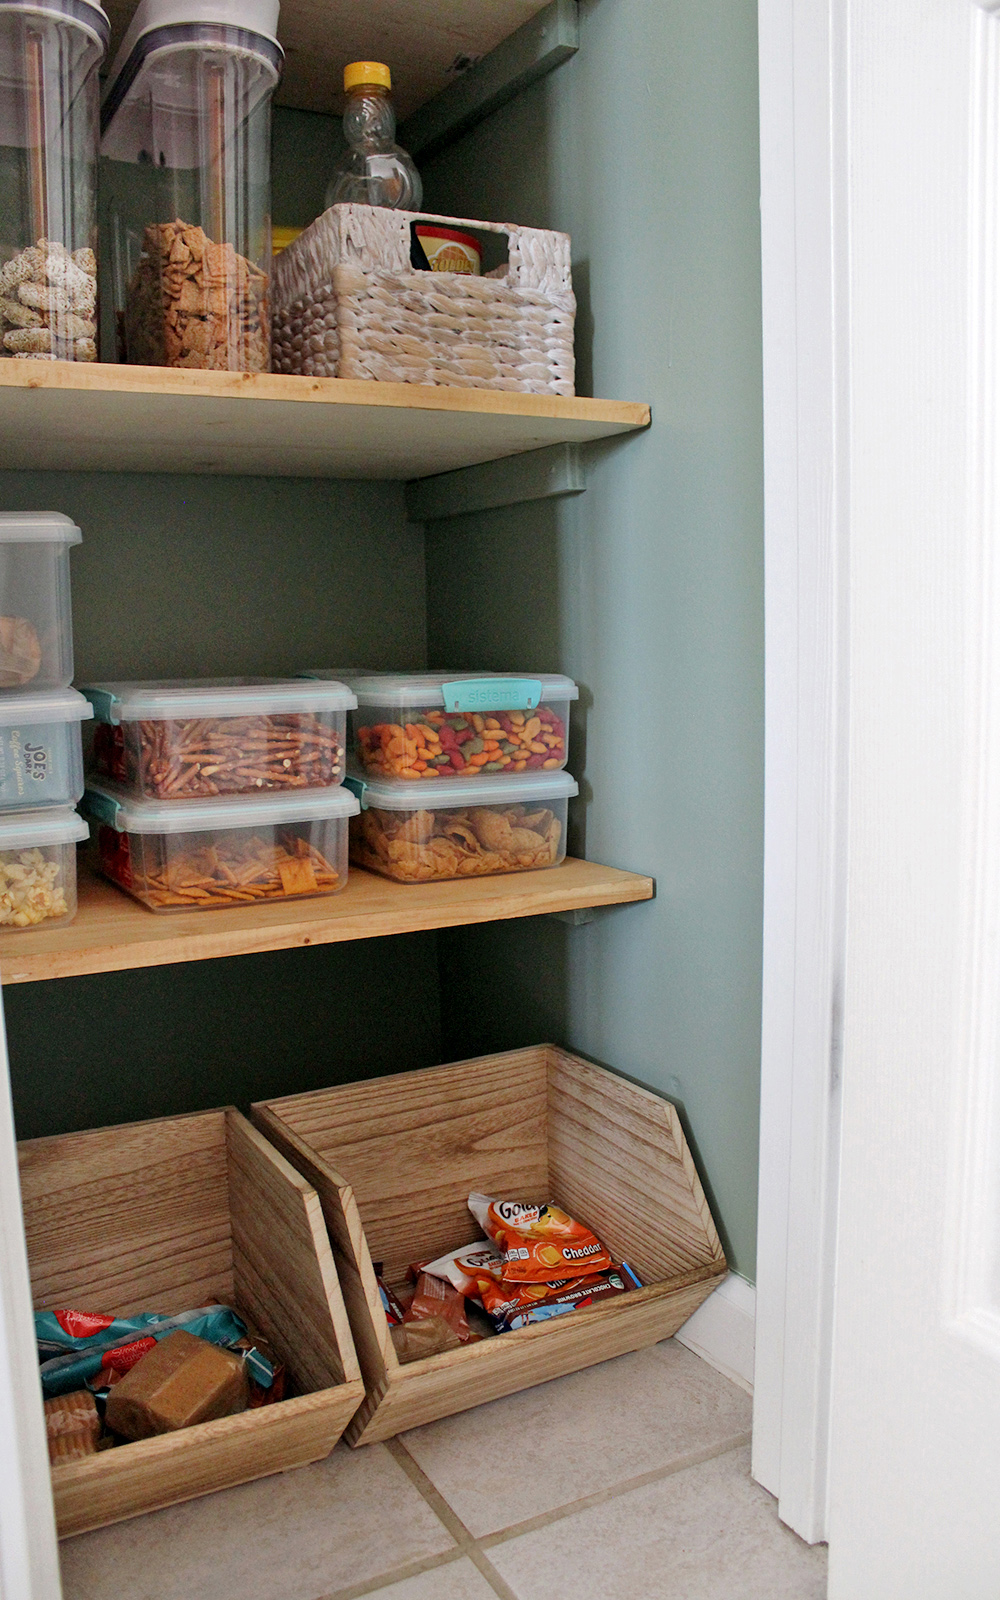 6 Practical Tips for Storing More in a Kitchen Pantry